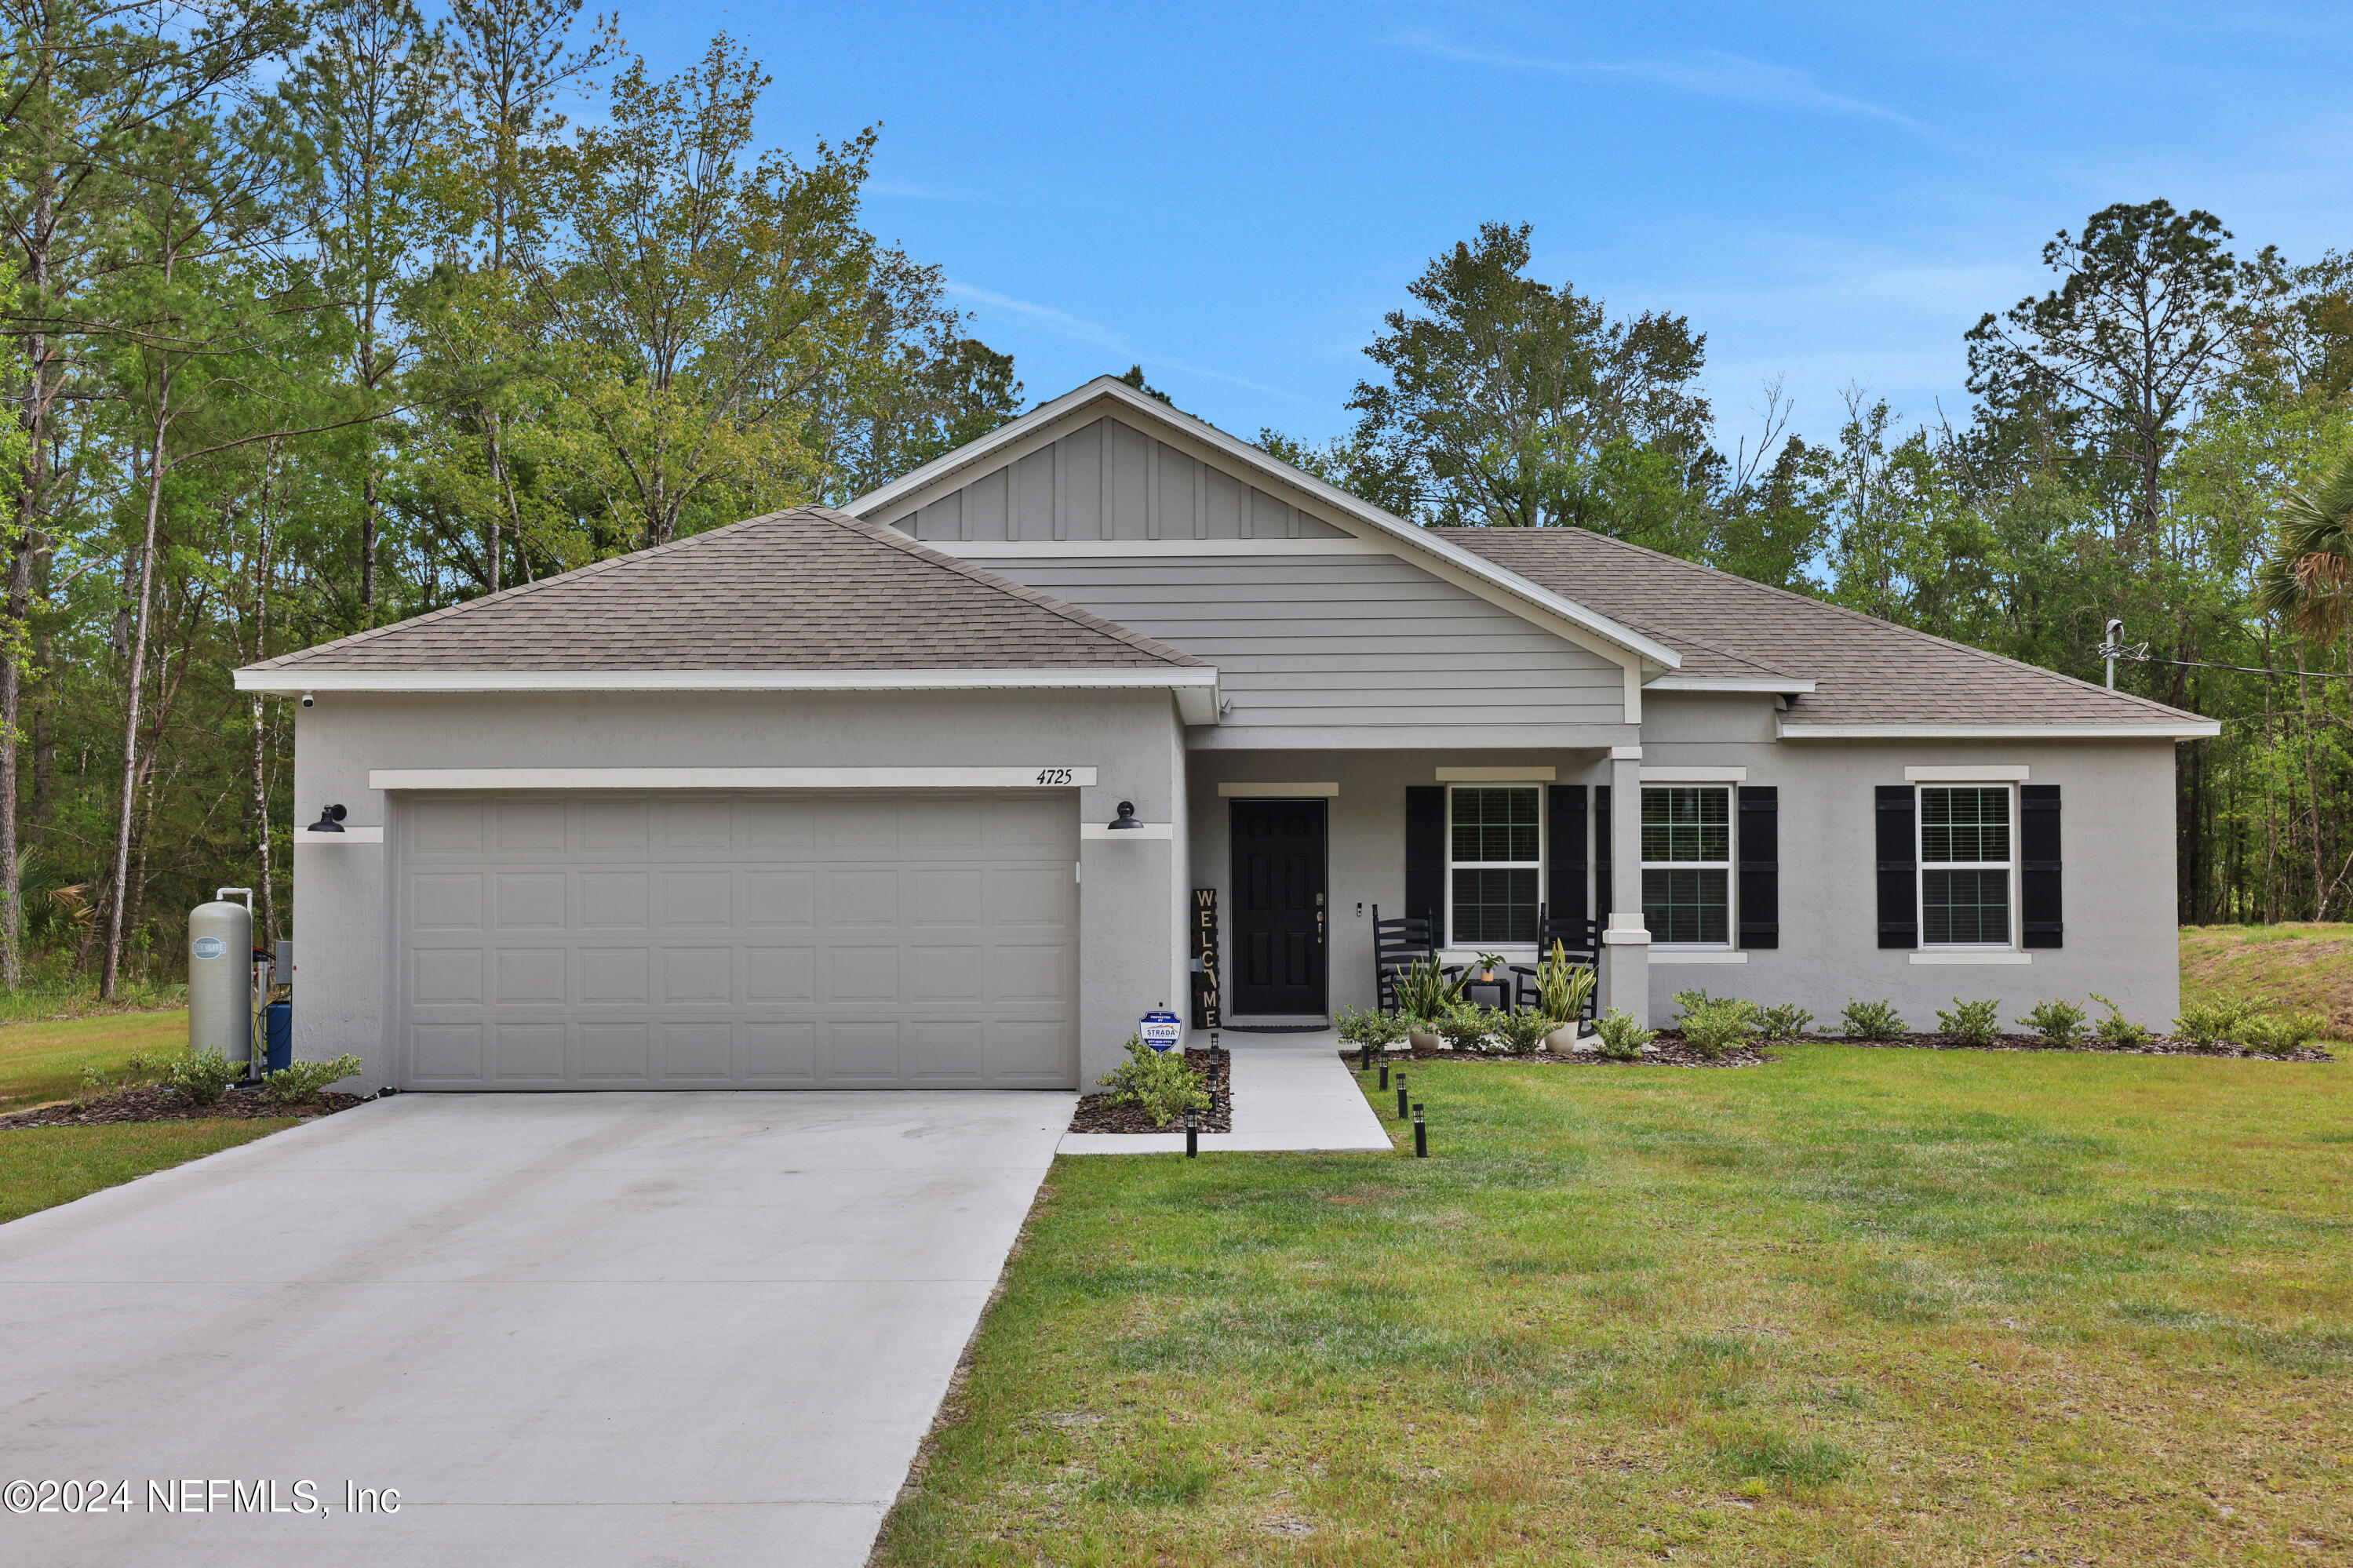 Hastings, FL home for sale located at 4725 Jonathan Street, Hastings, FL 32145